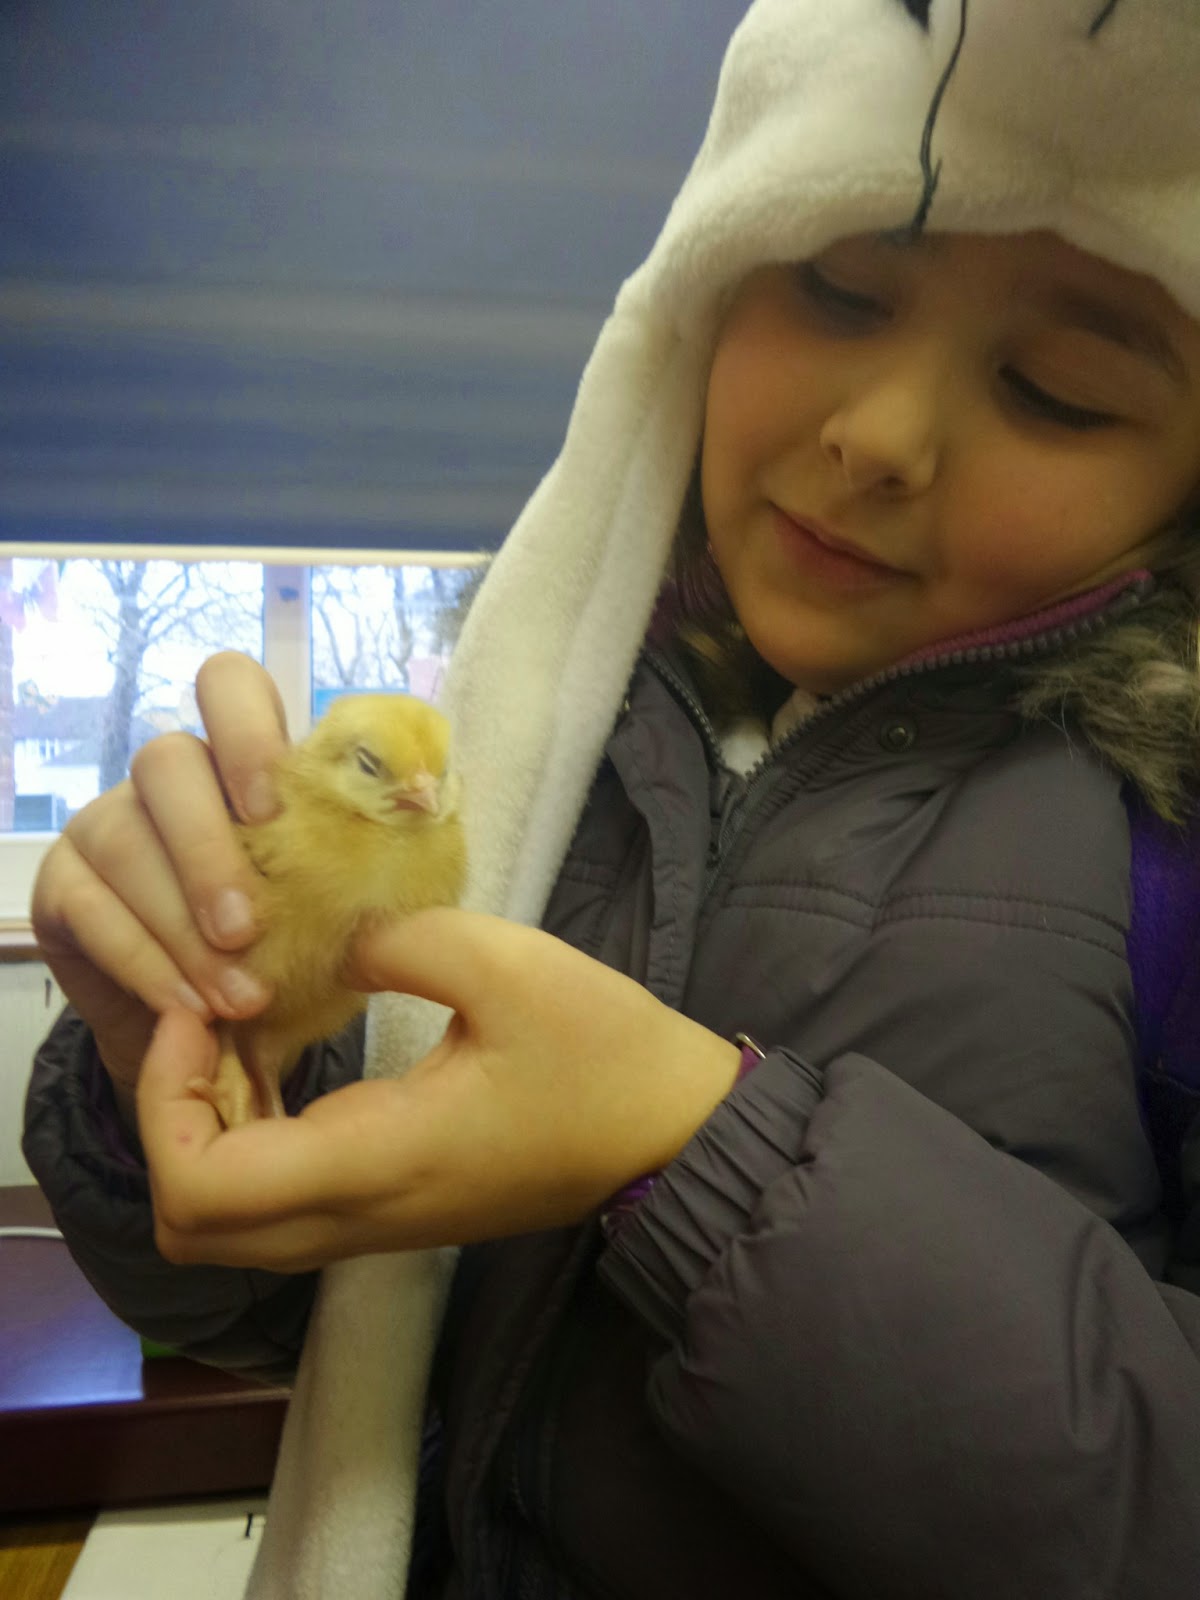 Top Ender holding a Little Baby Chick